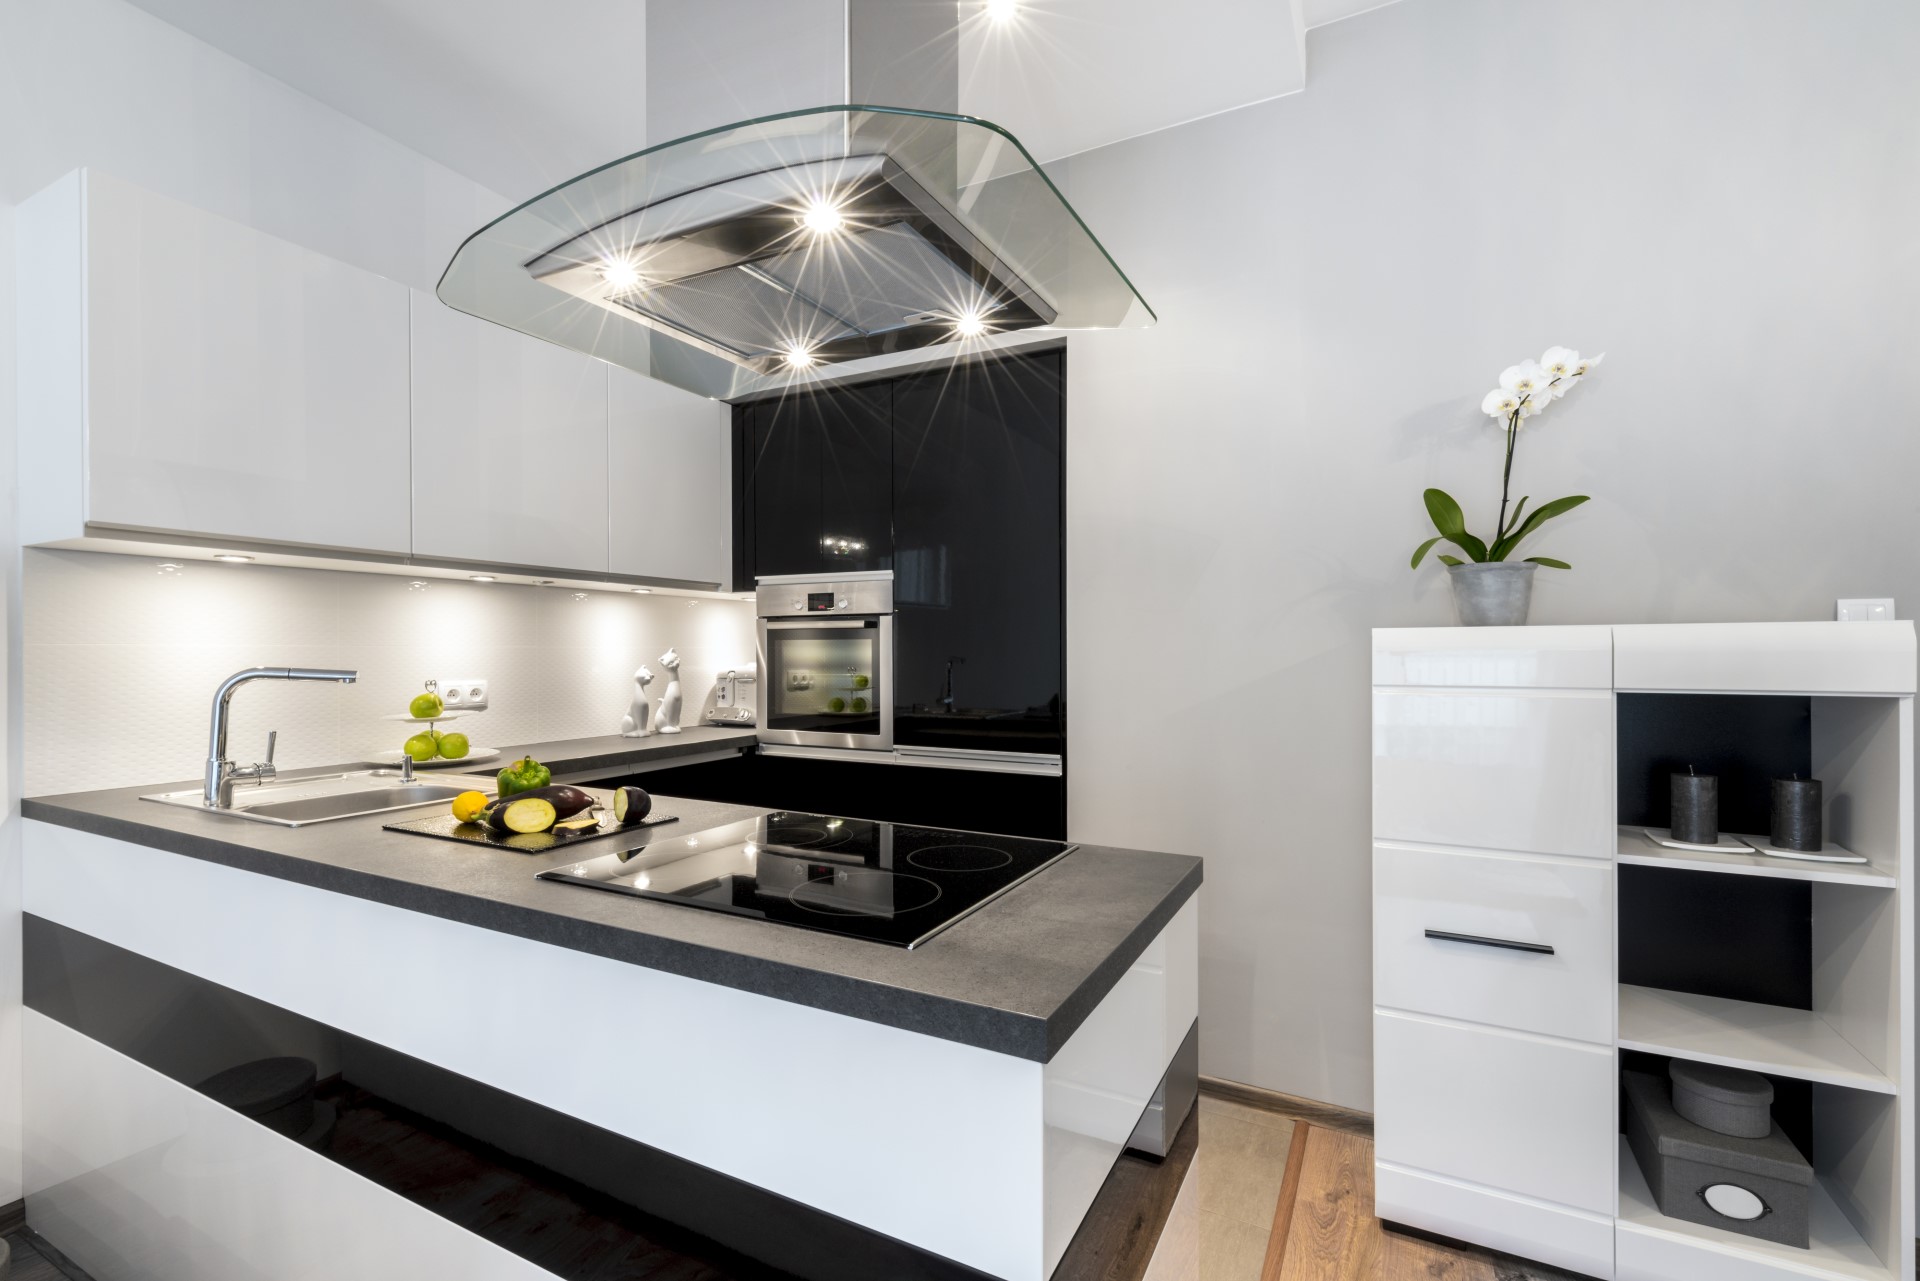 If you're looking for that edgy and cool kitchen layout, this modern design nails it. It comes with a useful functionality of using darker colors for the heavy traffic areas followed by lighter colors which help brighten everything. The glass style range hood is pretty cool too.